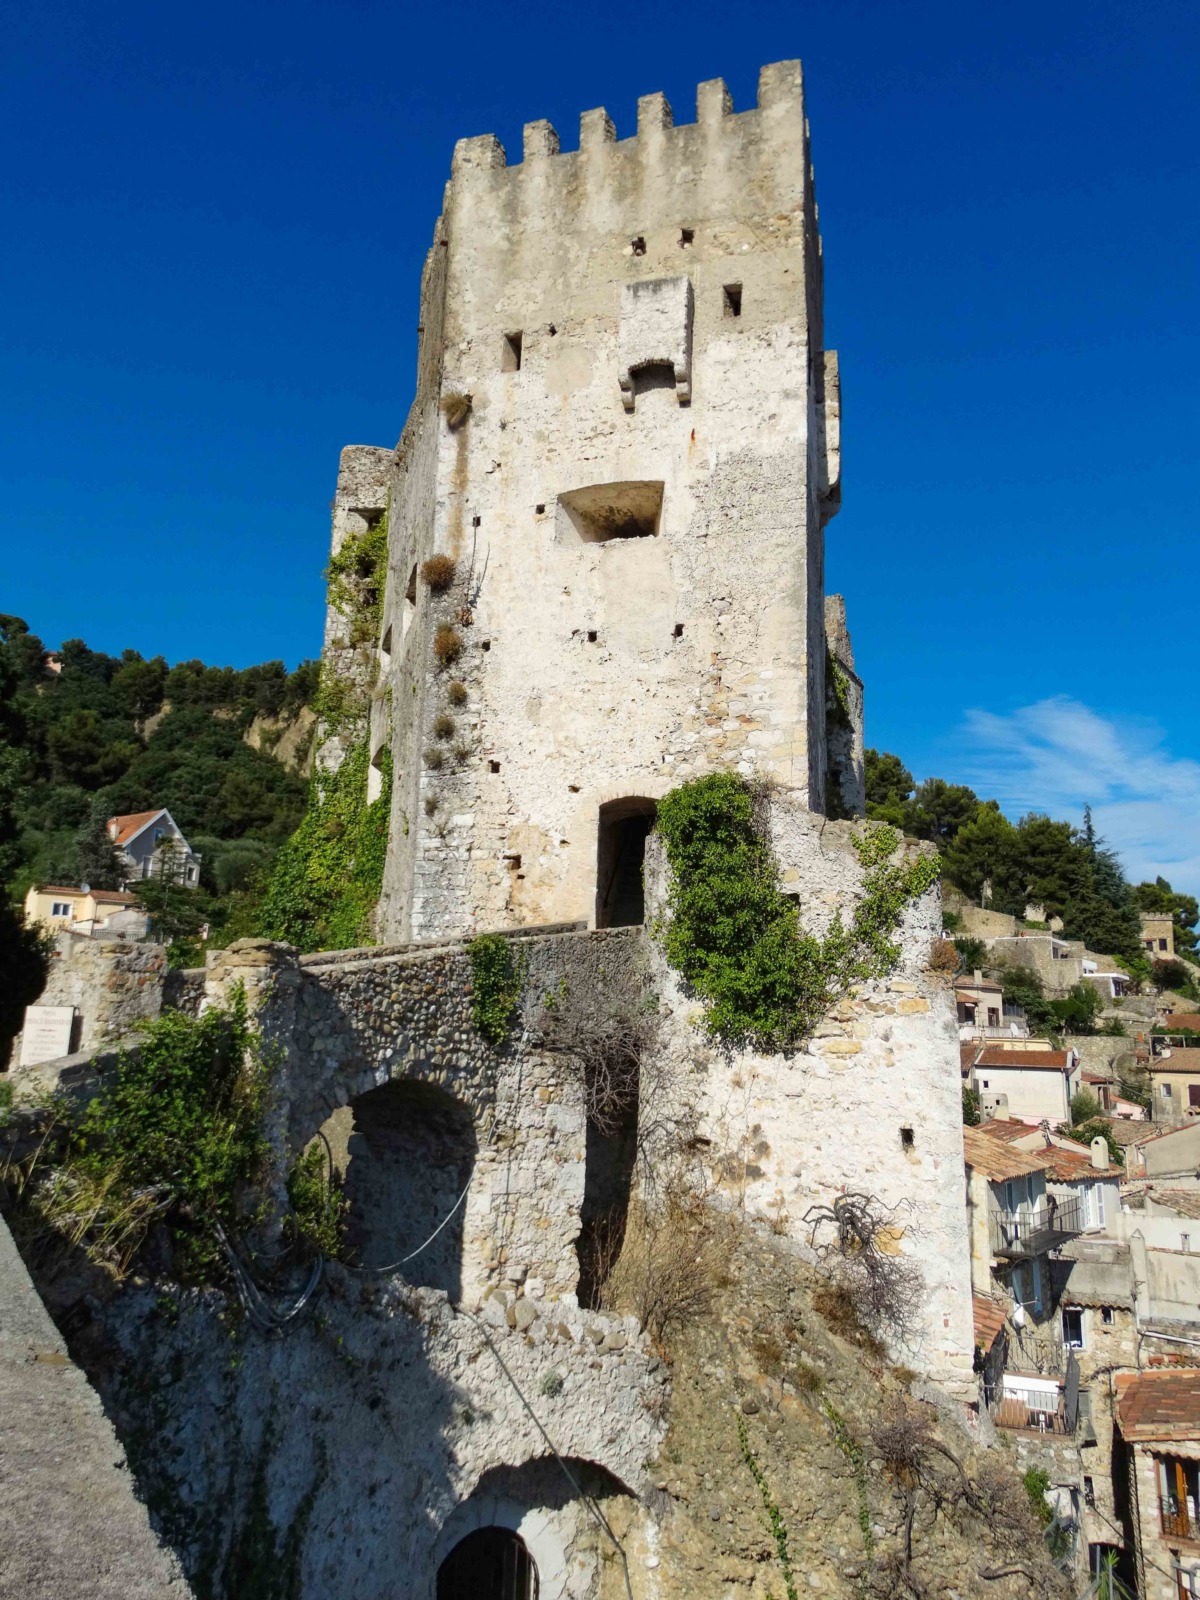 The Grimaldi Castle in Roquebrune-Cap-Martin © Leon petrosyan - licence [CC BY-SA 4.0] from Wikimedia Commons